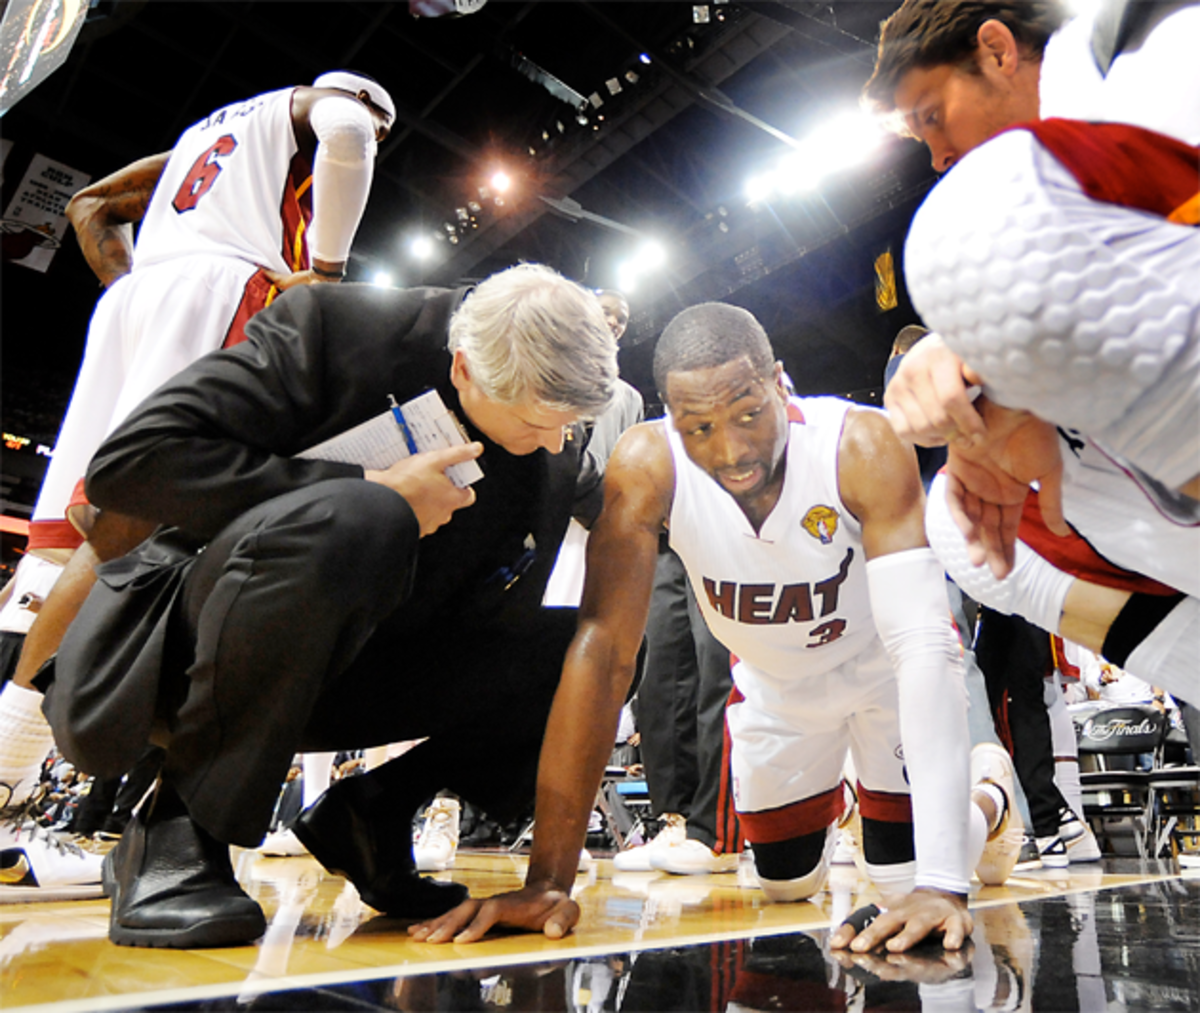 ReHeat: LeBron wouldn't let Miami lose